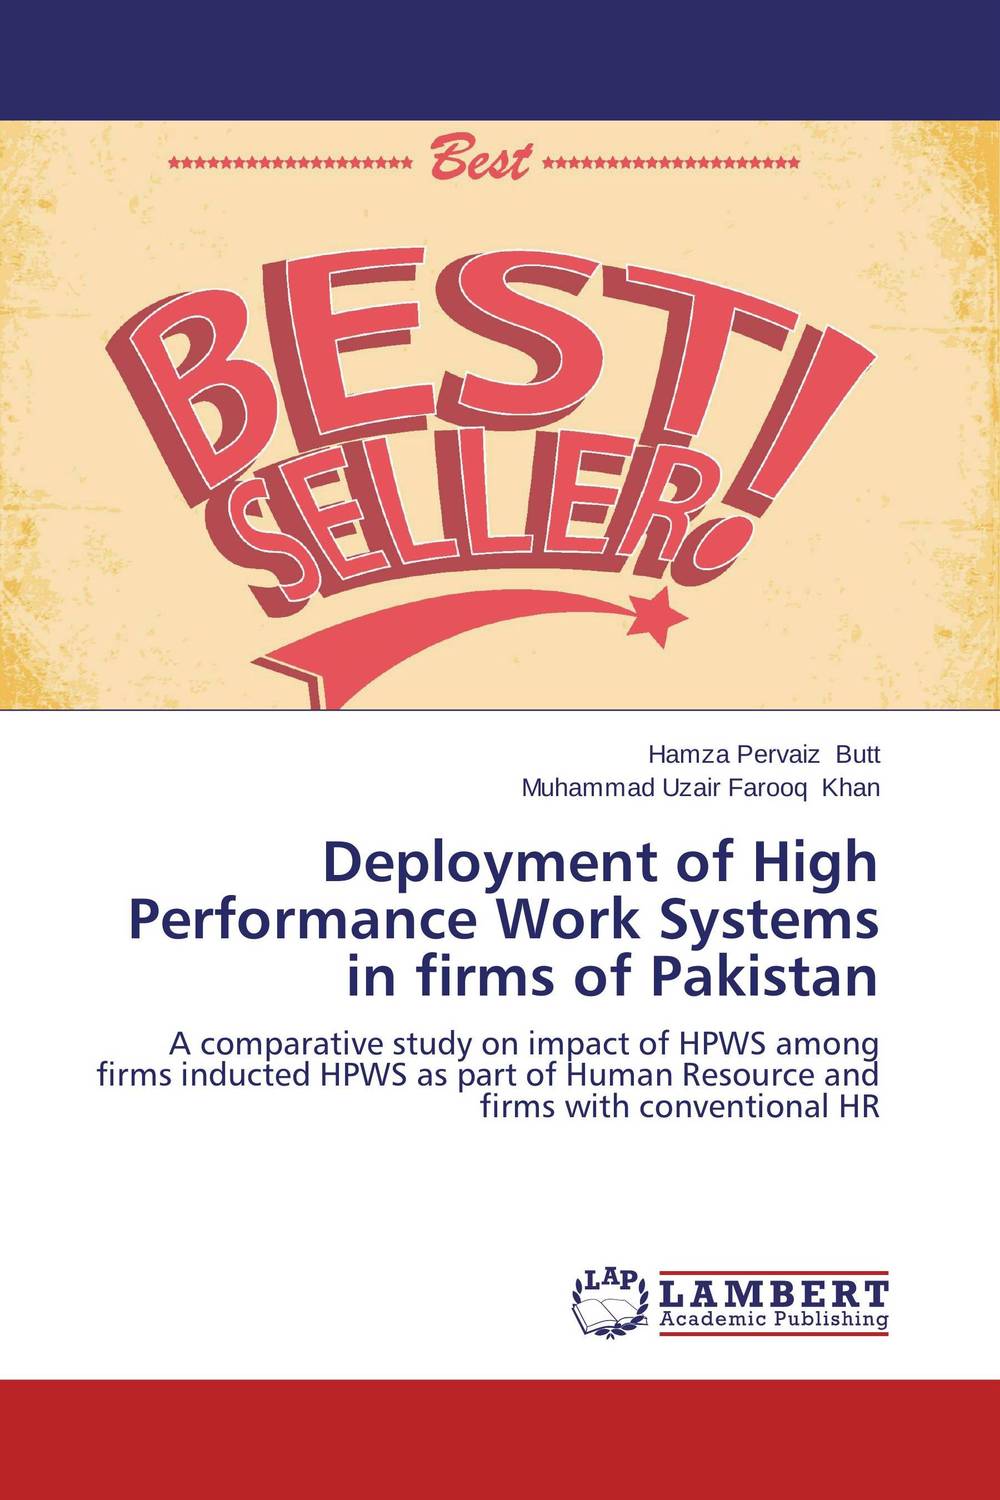 Deployment of High Performance Work Systems in firms of Pakistan